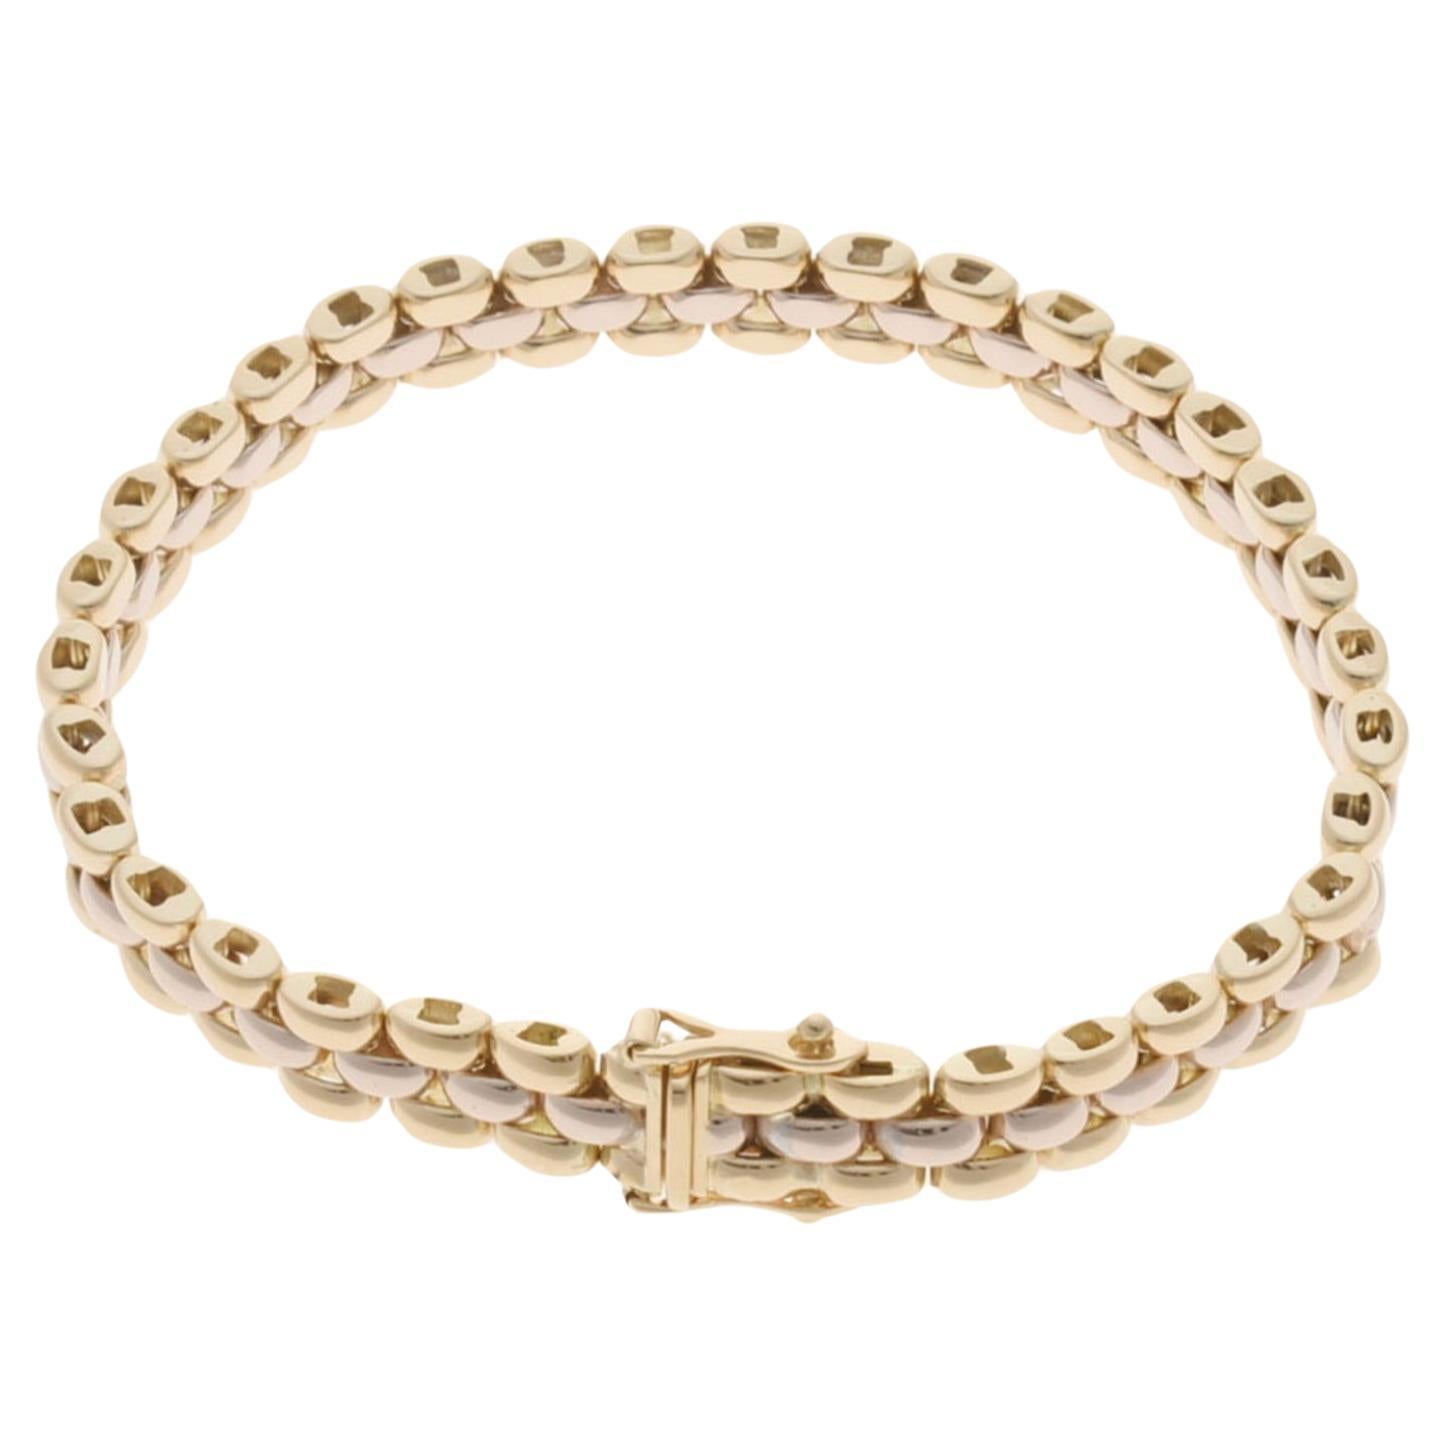 Piaget Bracelet in 18K Yellow Gold and White Gold